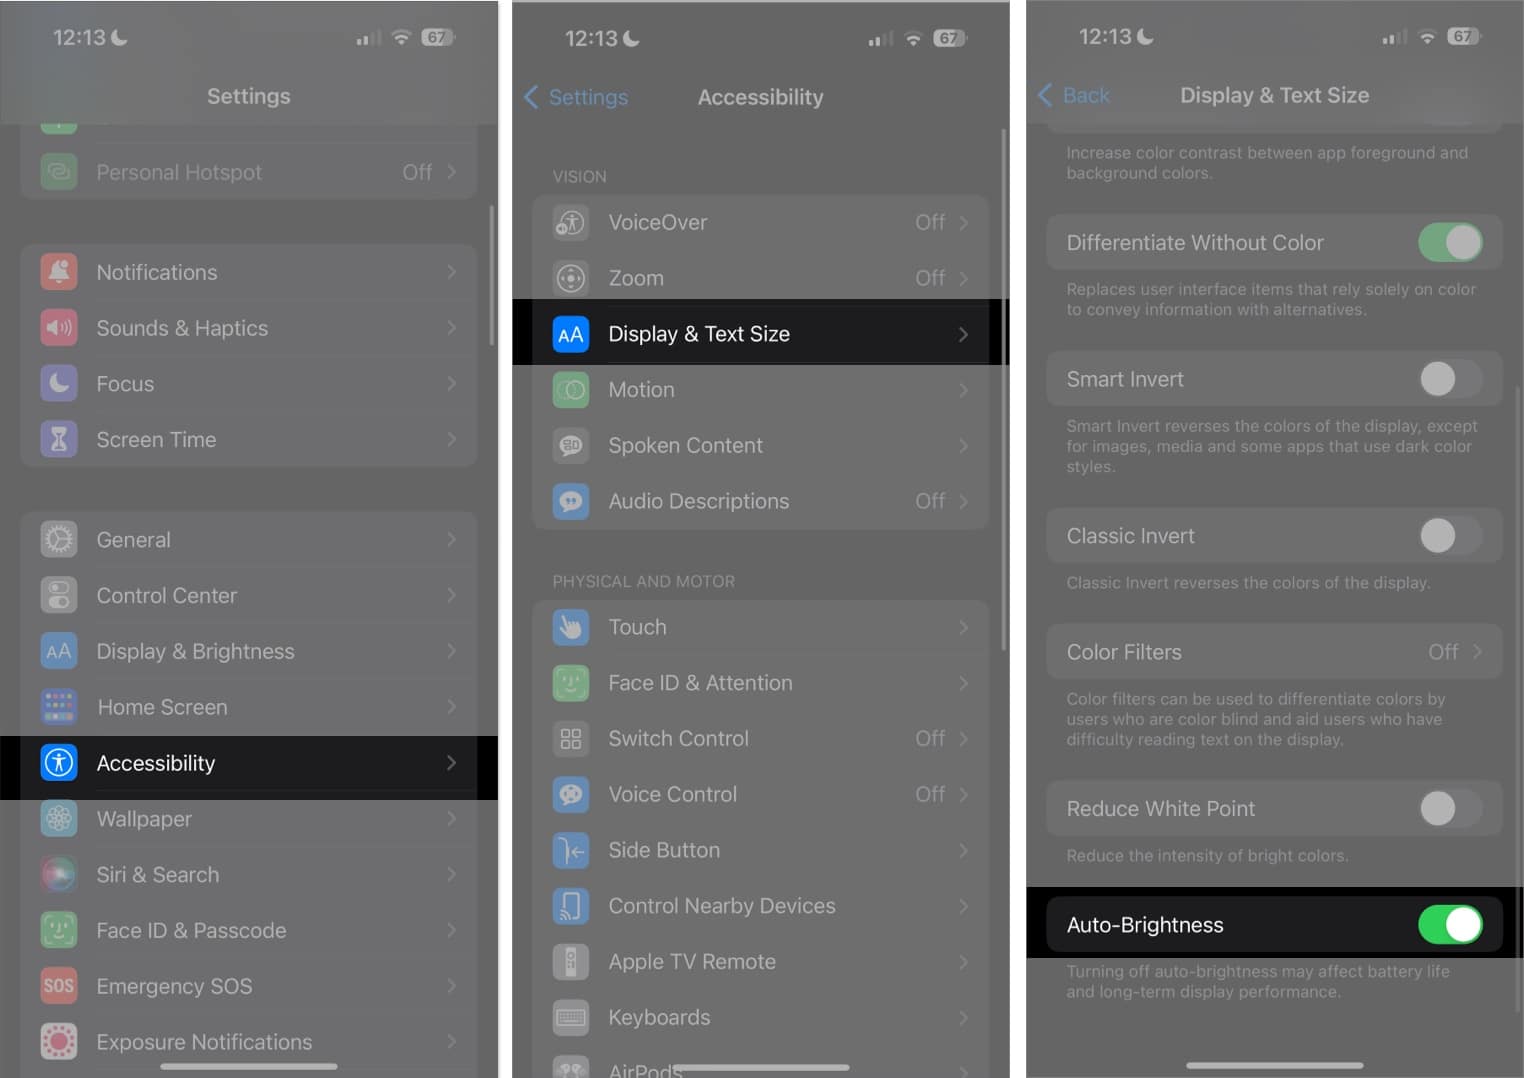 Go to settings, tap on Accessibility, choose Display & Text Size and enable Auto Brightness